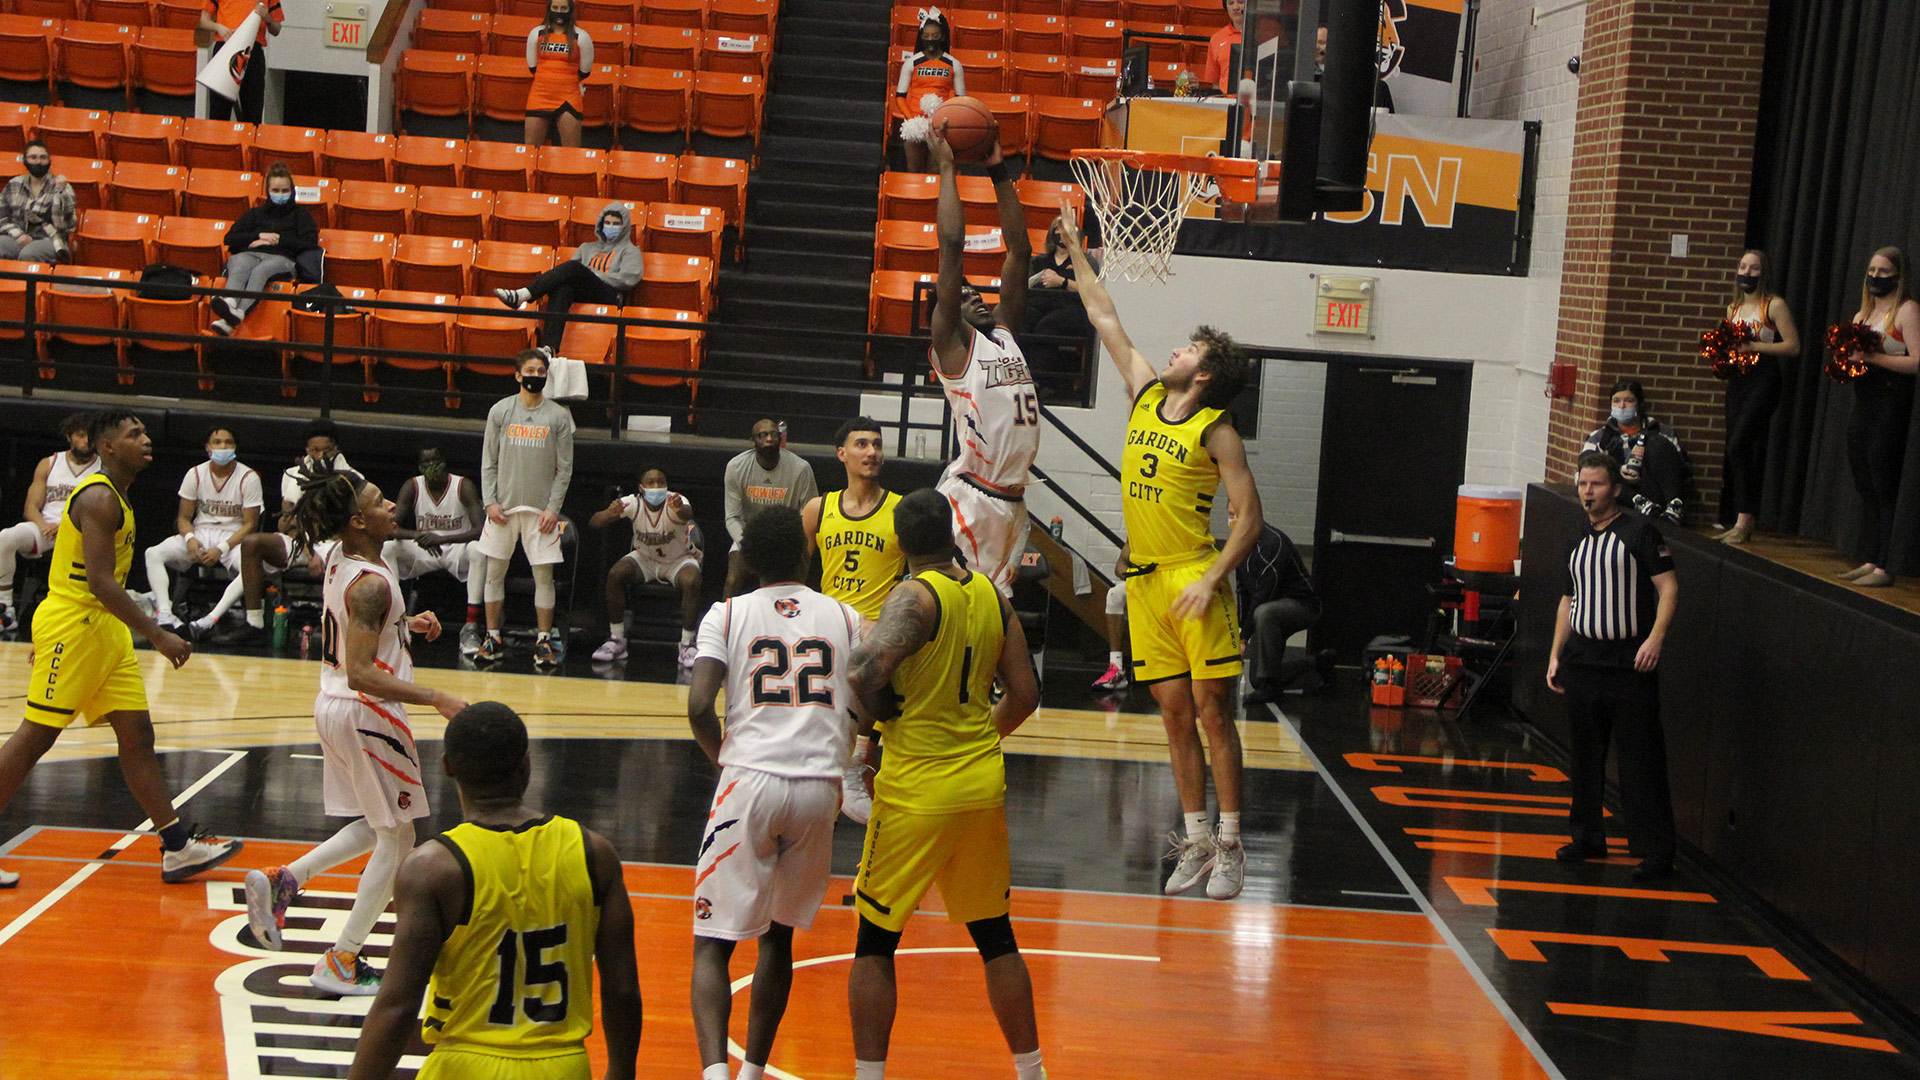 Tigers open conference play with 101-89 win over Garden City